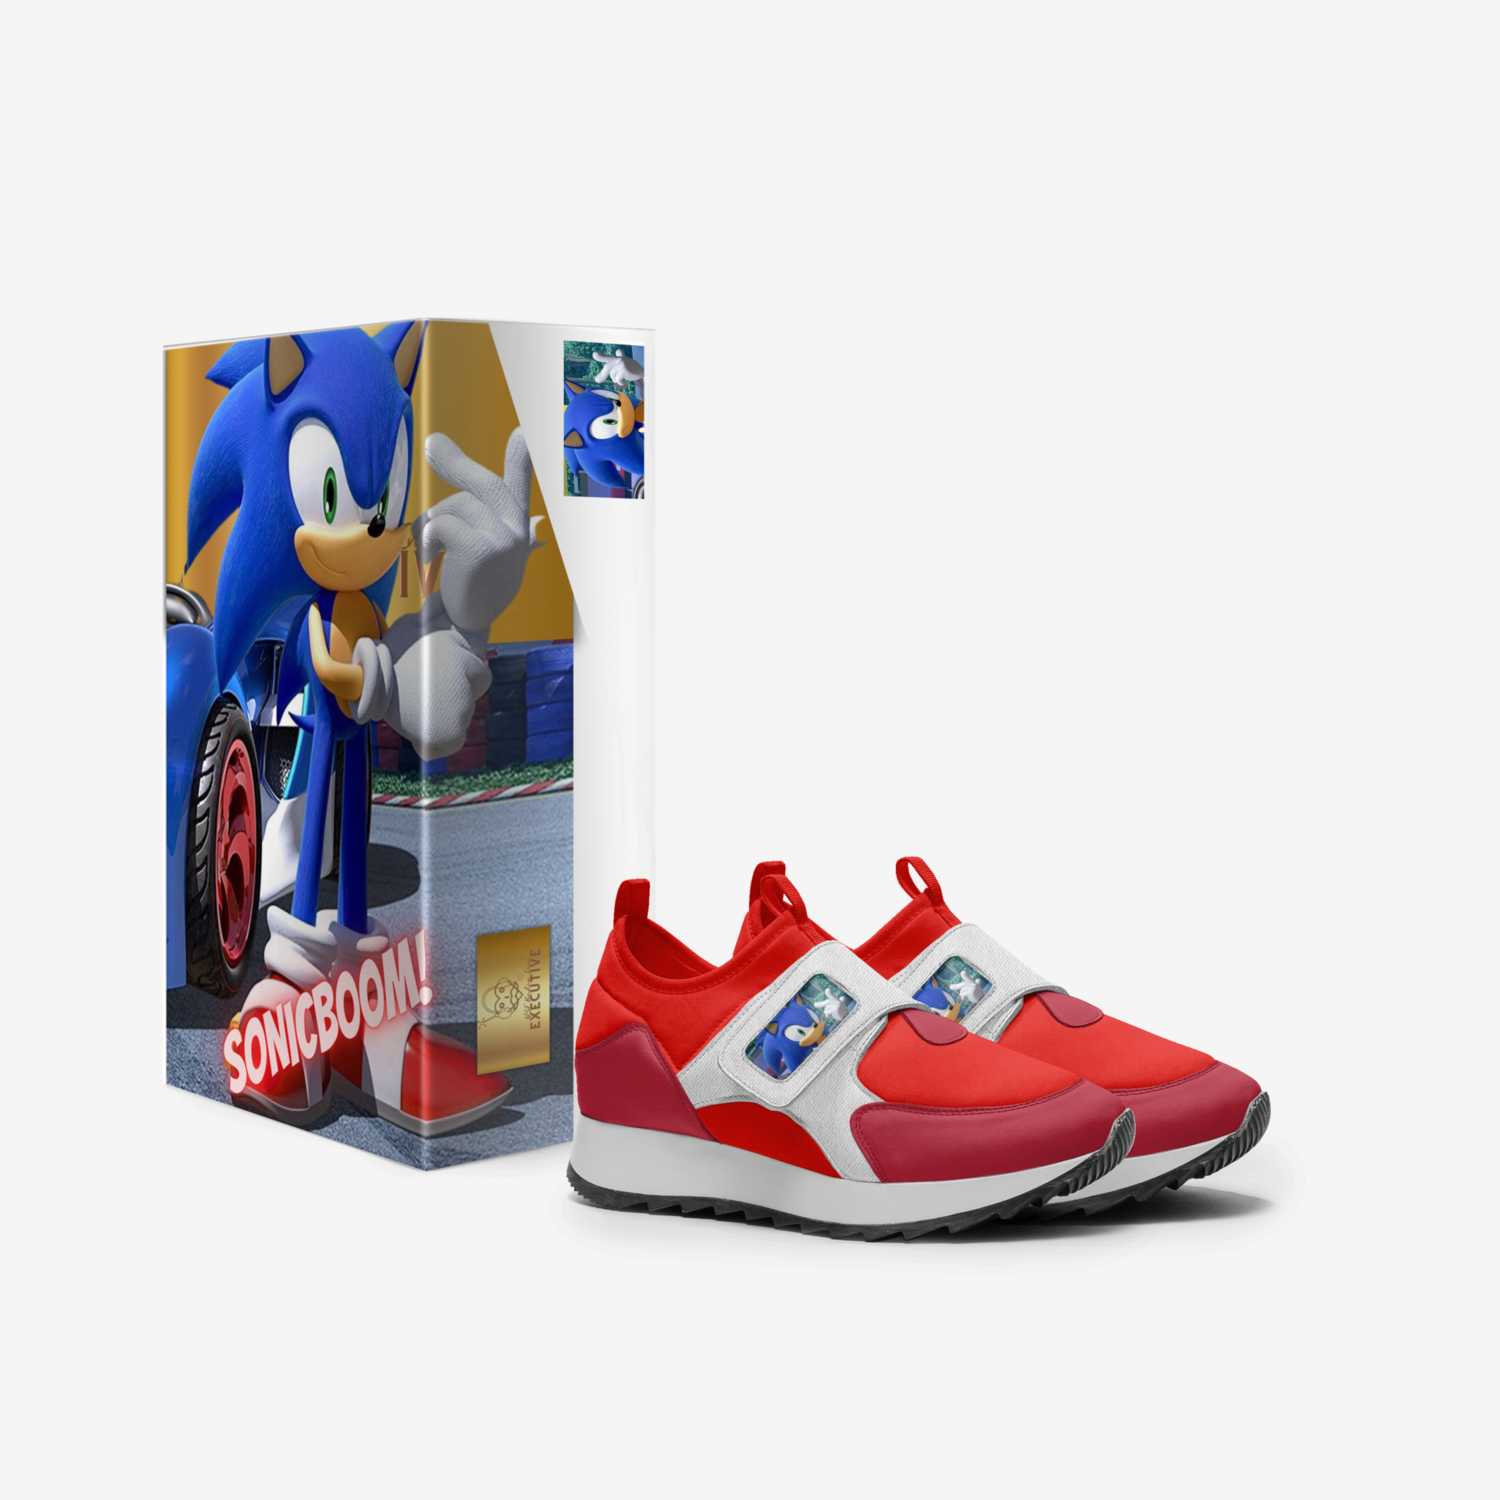 My SonicB00M custom made in Italy shoes by Nsf Radio Inc. | Box view